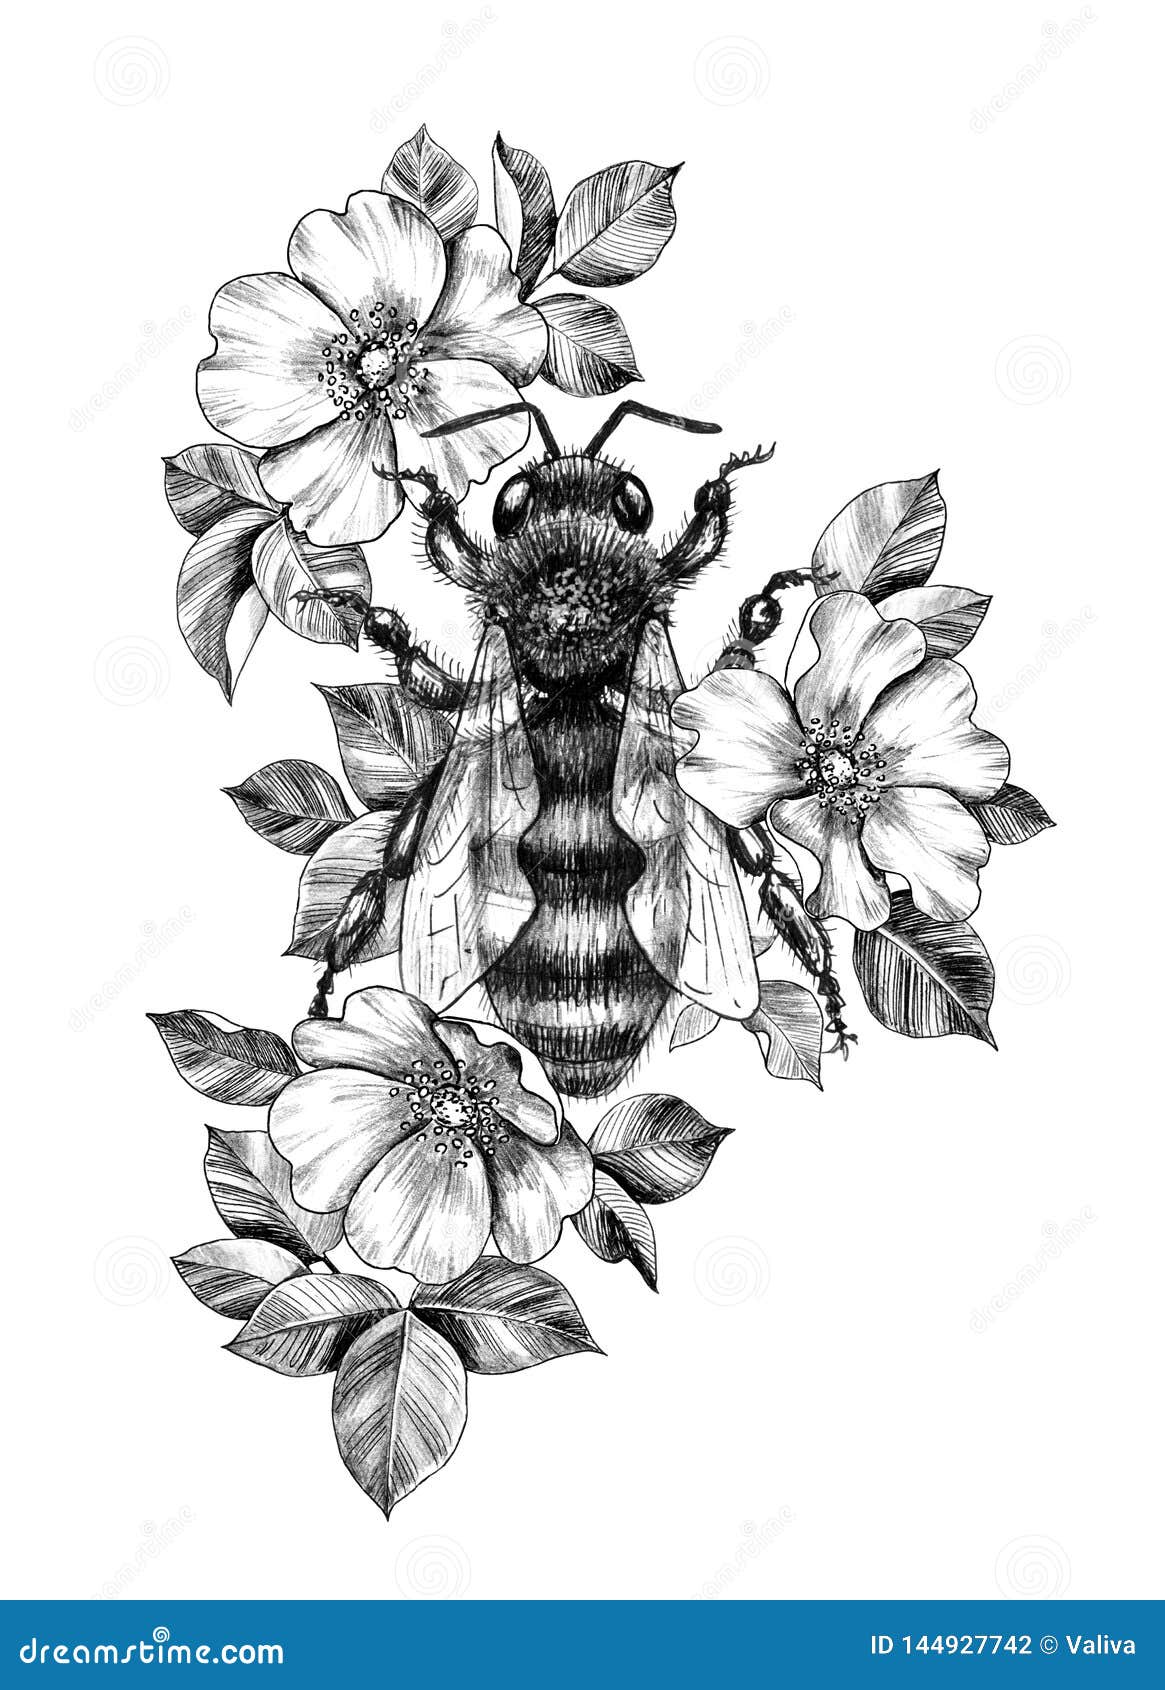 https://thumbs.dreamstime.com/z/hand-drawn-monochrome-bee-dog-rose-flowers-big-decorated-roses-isolated-white-background-pencil-drawing-honeybee-elegant-144927742.jpg